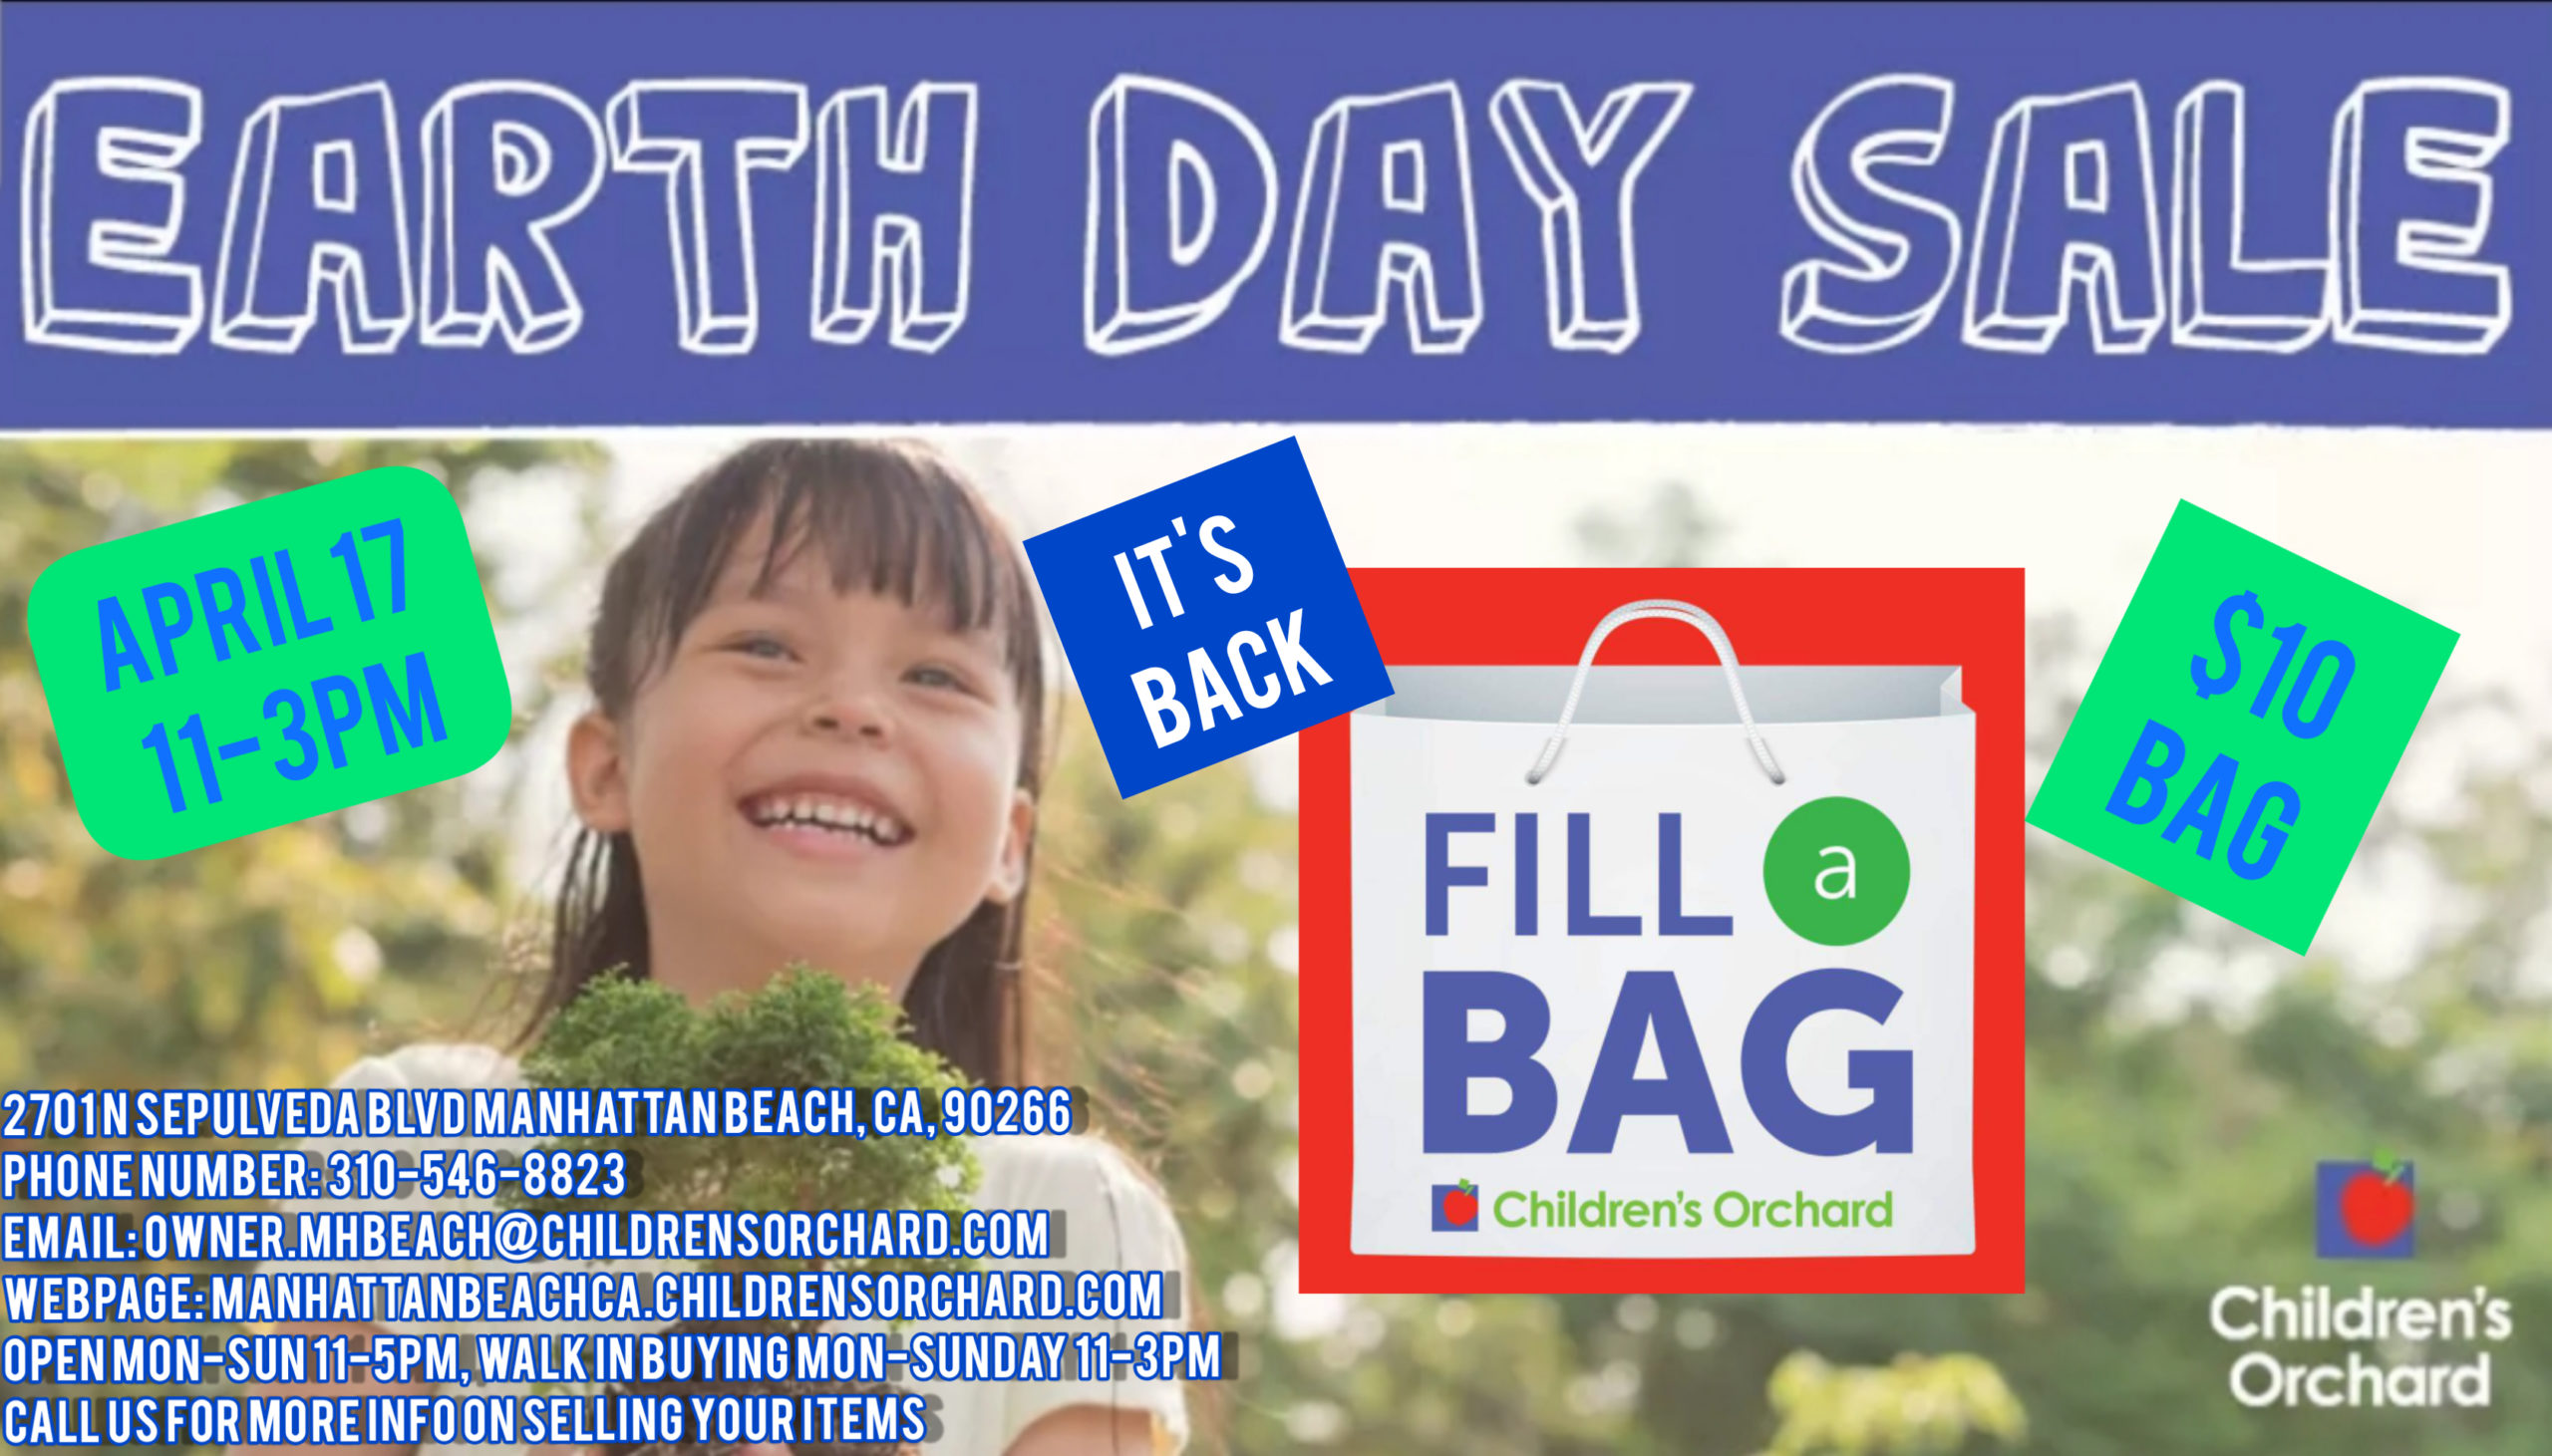 Earth day sale: April 17, 11am-3pm. Fill a bag: it's back, $10 bag.